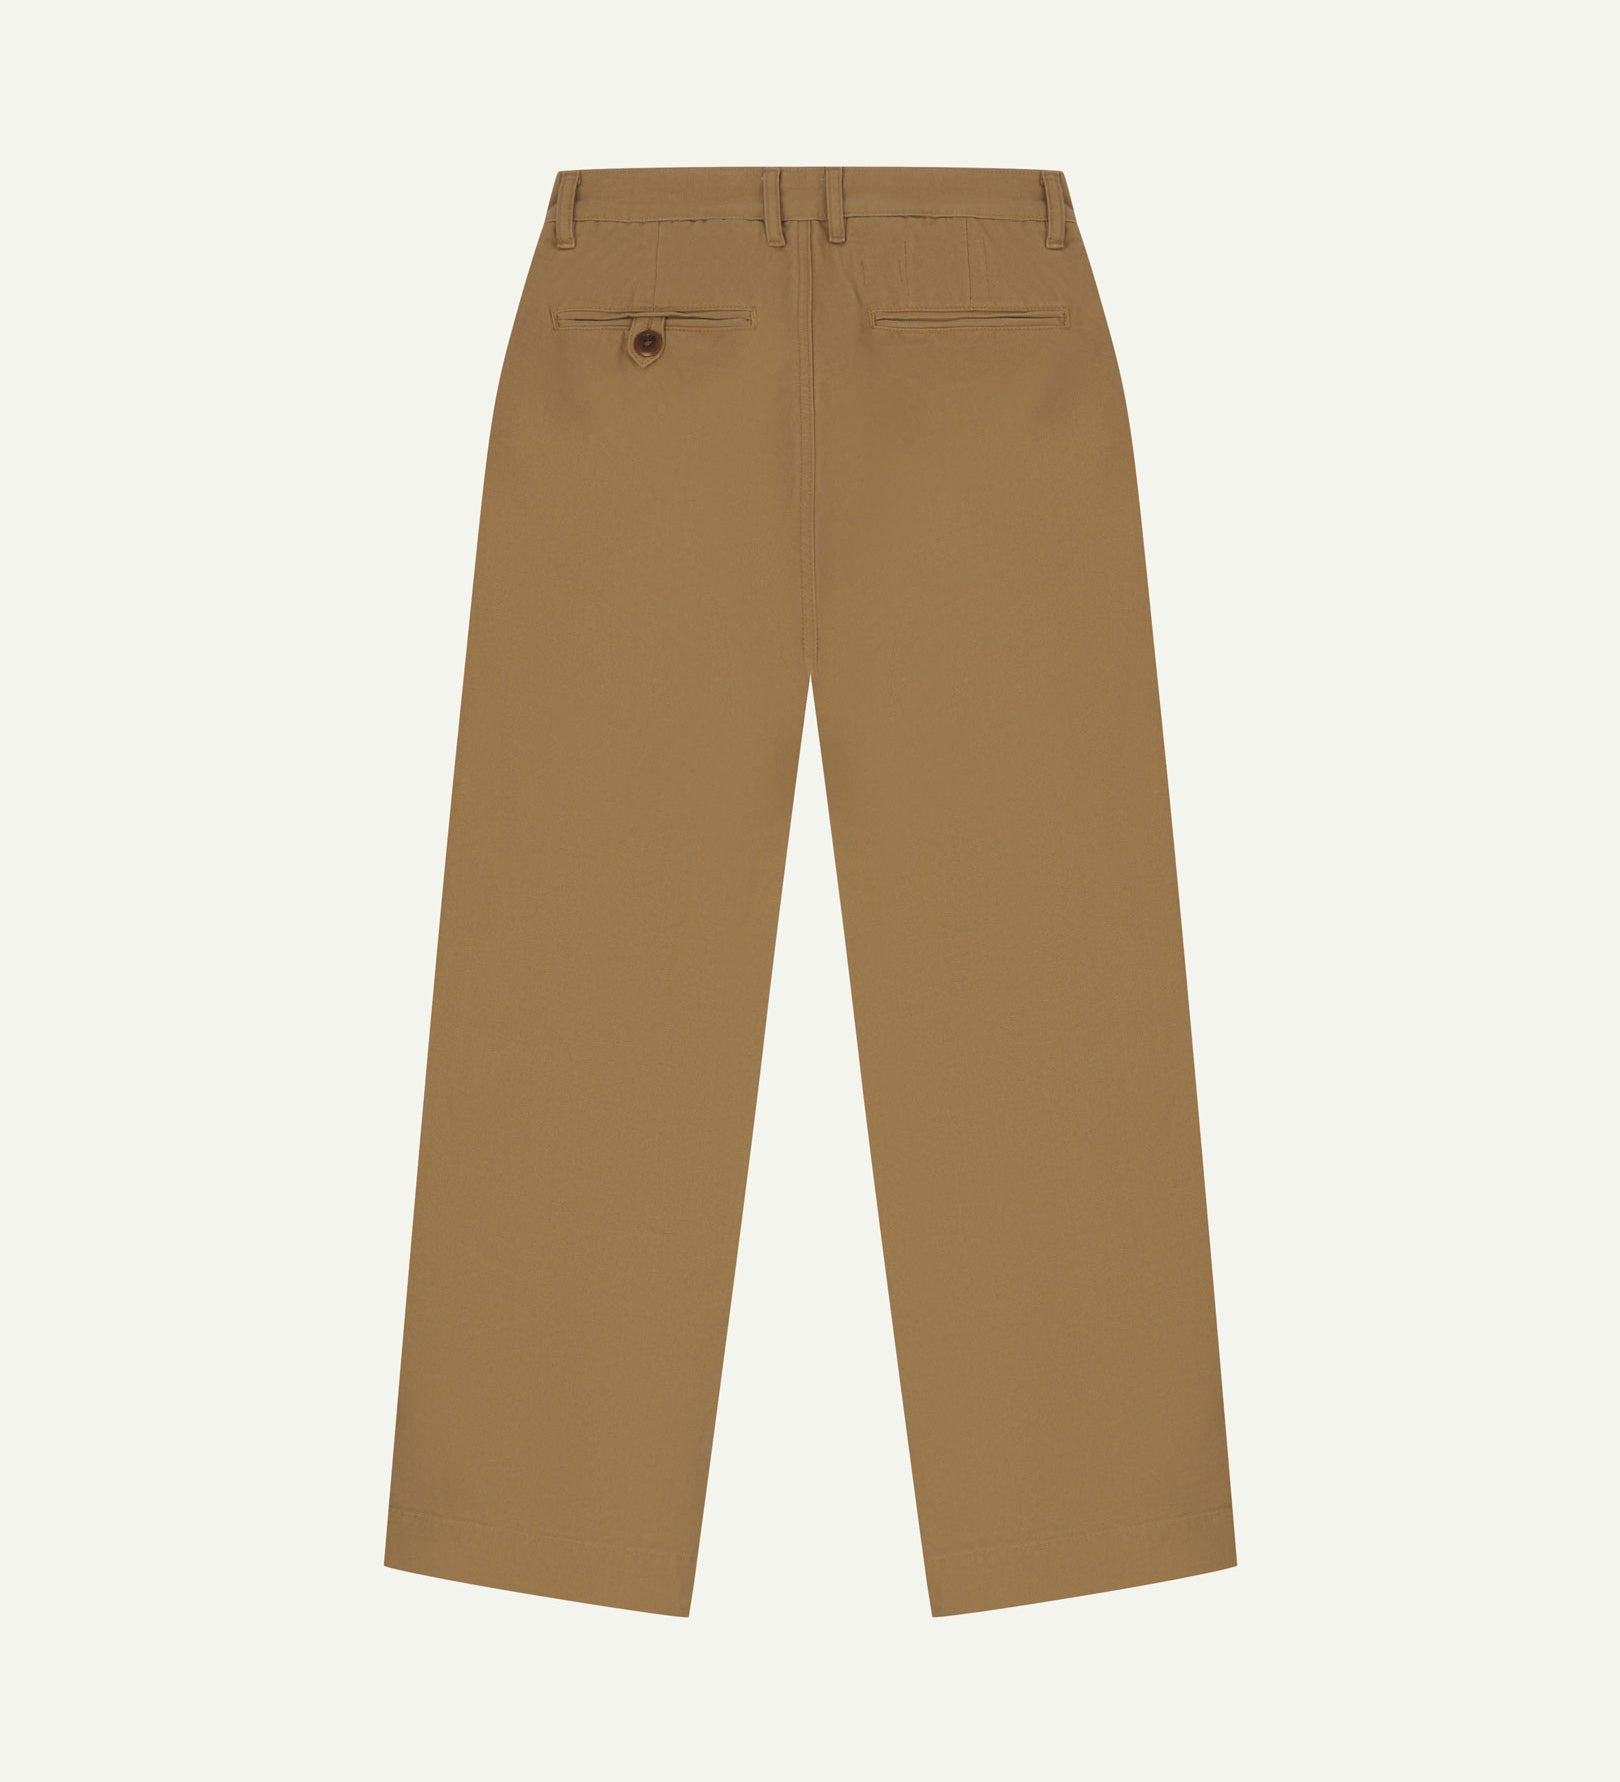 Back view of 5018 Uskees men's organic mid-weight cotton boat trousers in khaki showing wide leg style and buttoned back pocket.